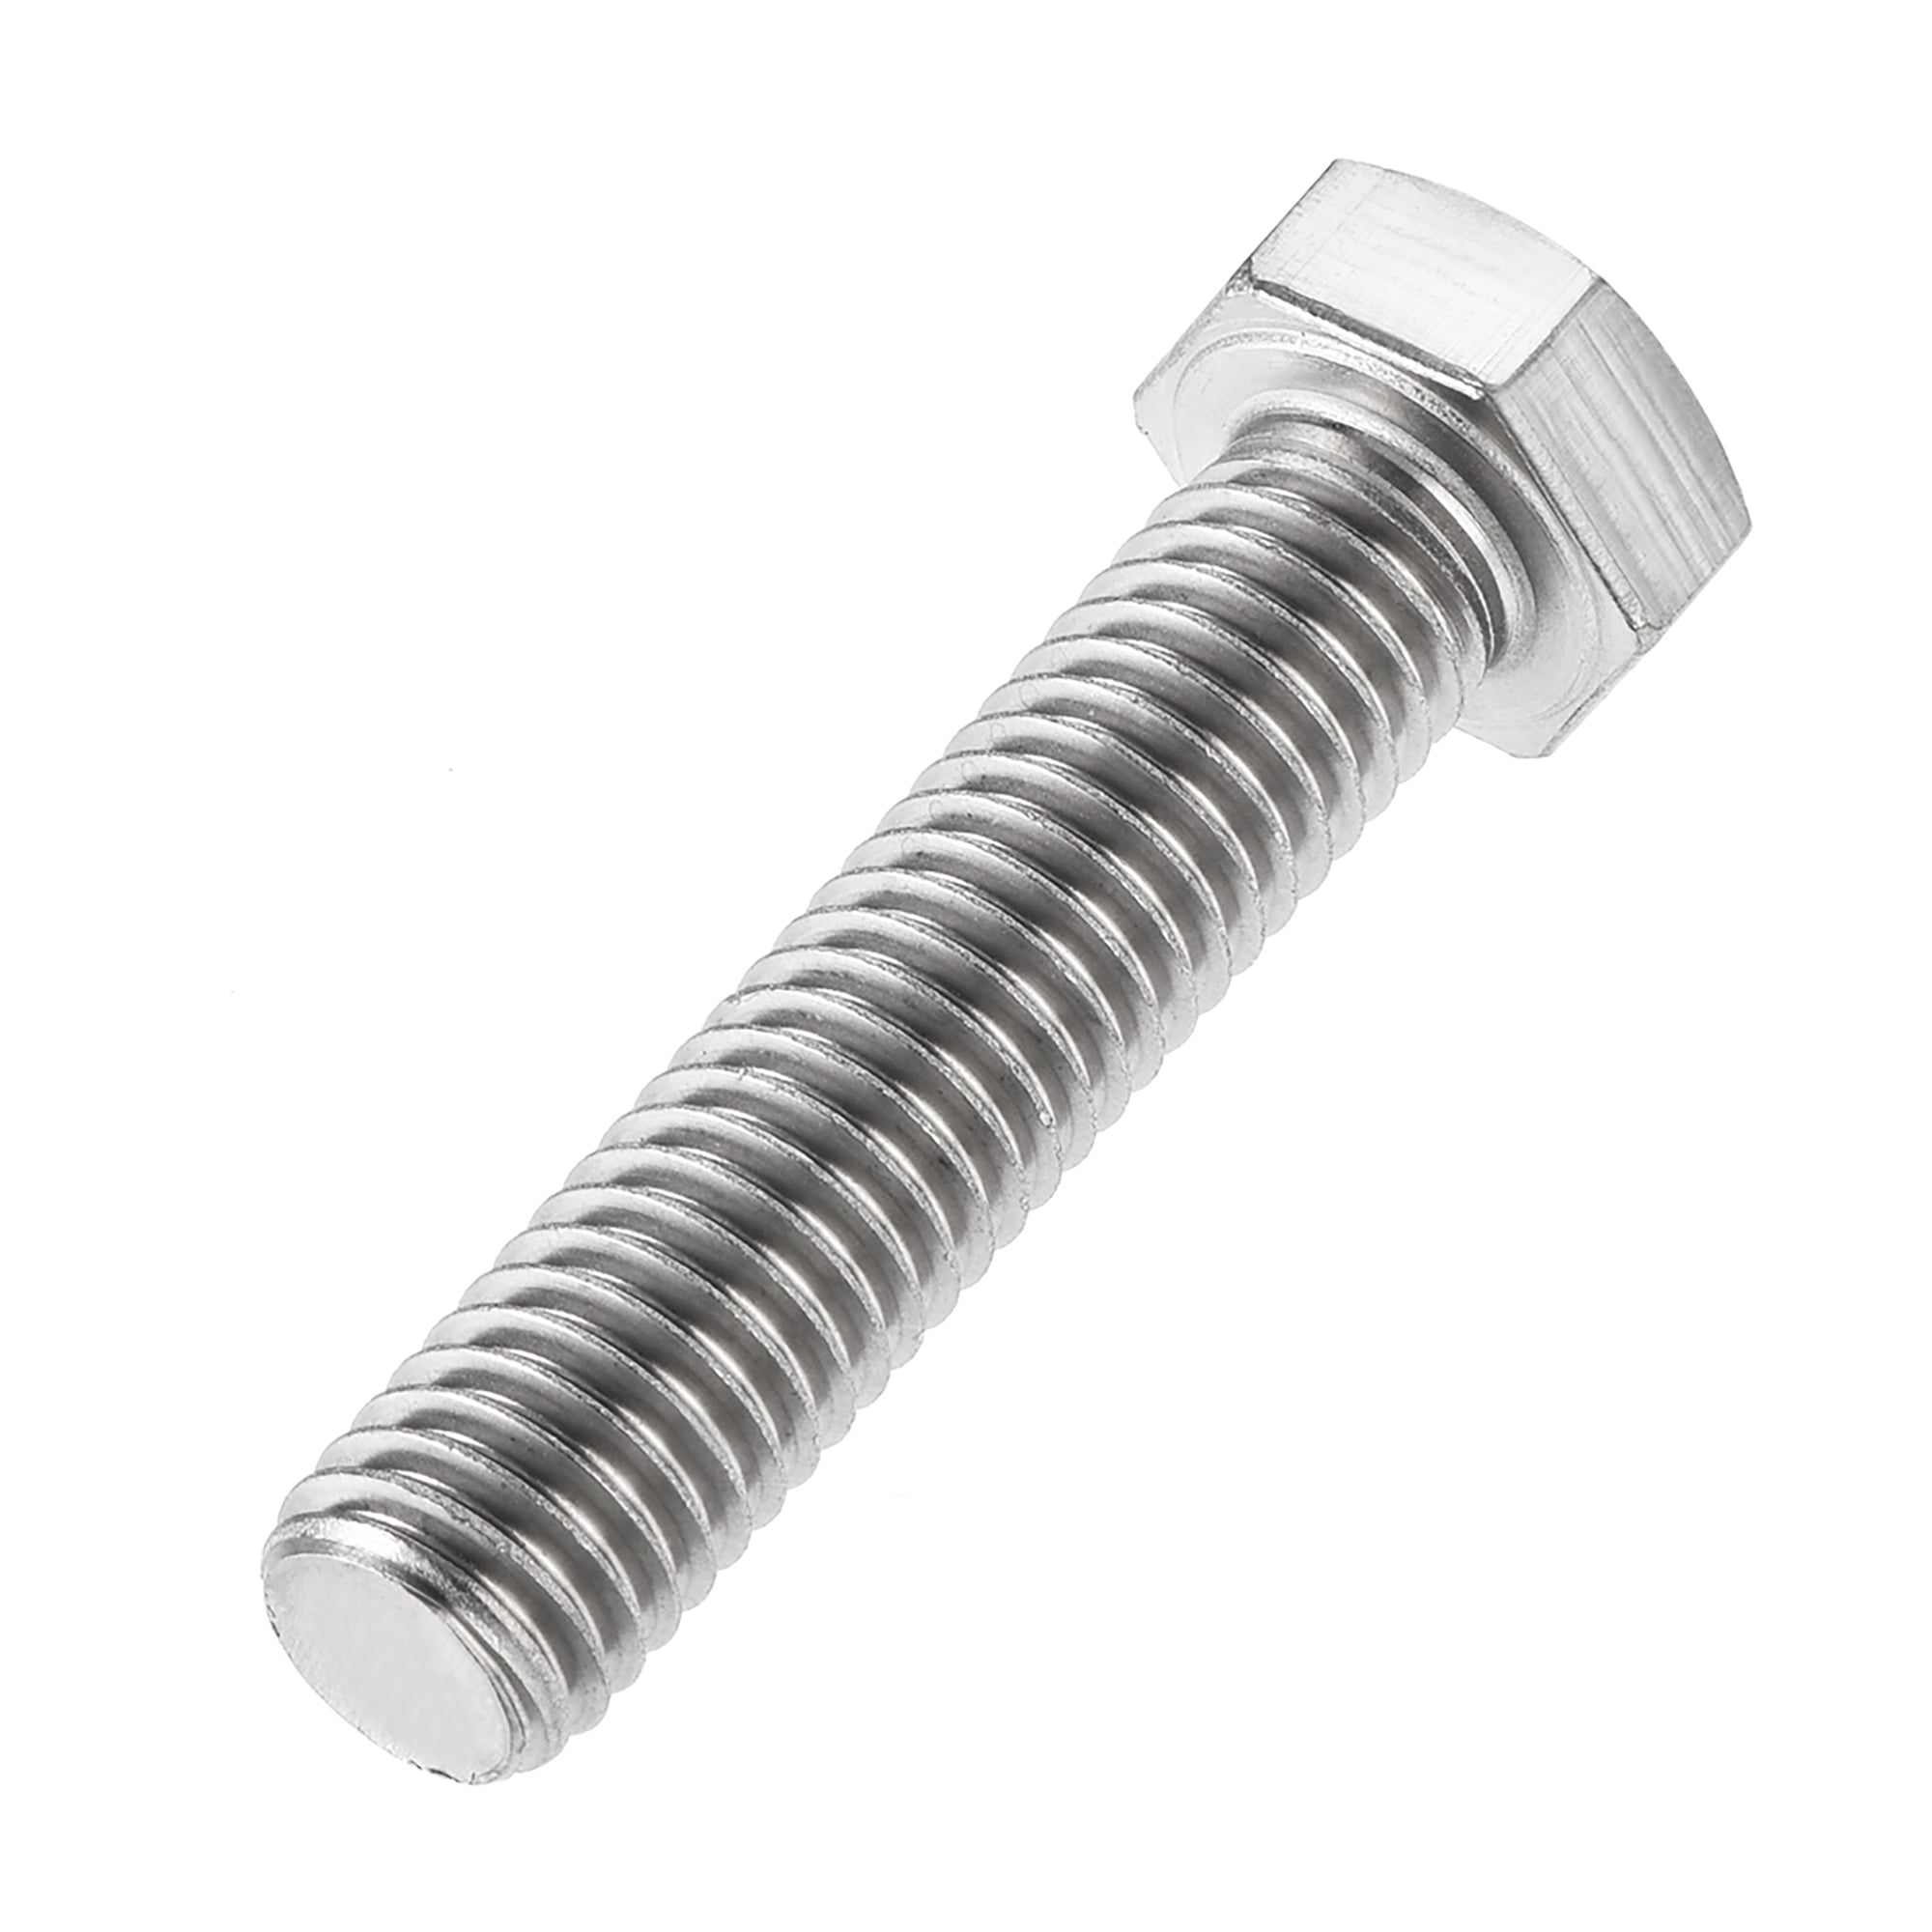 Details about   1/2-13 x 2-1/4" Hex Head Screw Bolt 5.8 Grade 304 Stainless Steel Bolts 